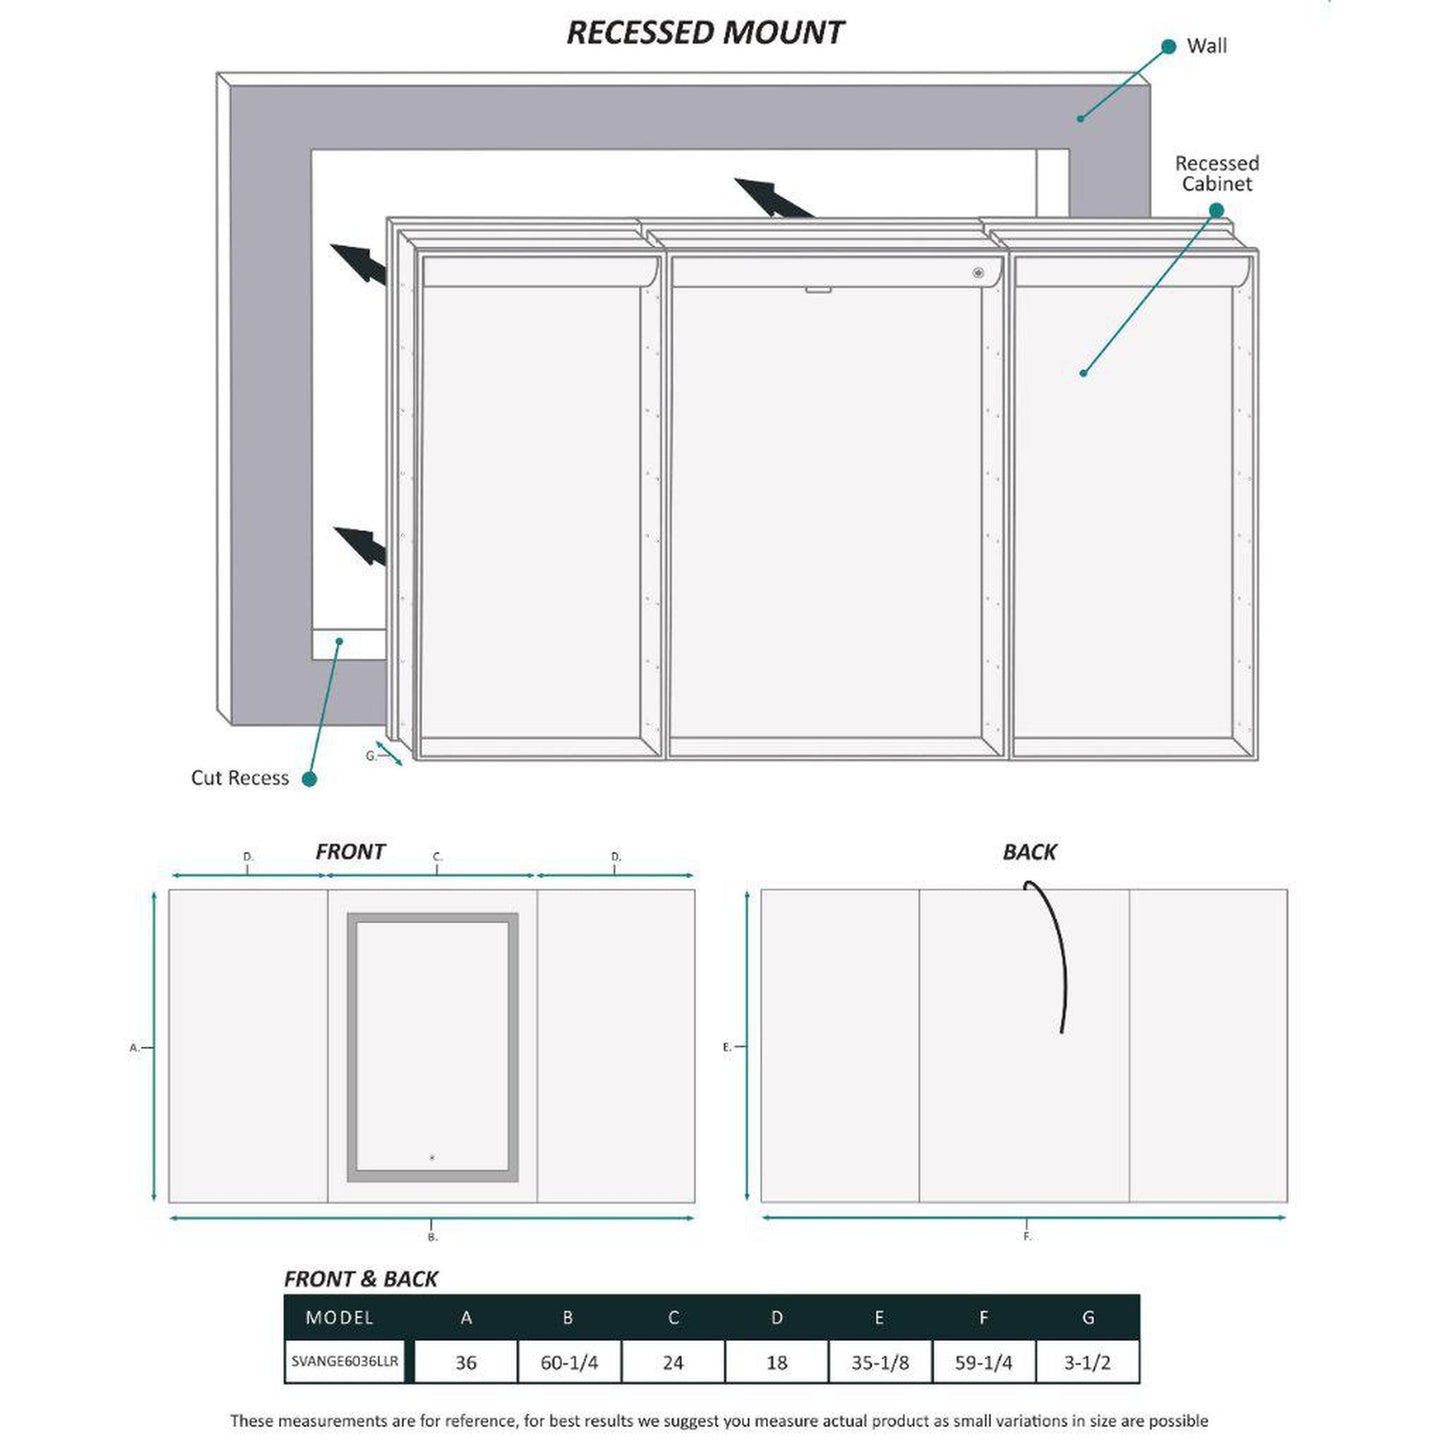 Krugg Reflections Svange 60" x 36" 5000K Single Tri-View Left-Left-Right Opening Recessed/Surface-Mount Illuminated Silver Backed LED Medicine Cabinet Mirror With Built-in Defogger, Dimmer and Electrical Outlet